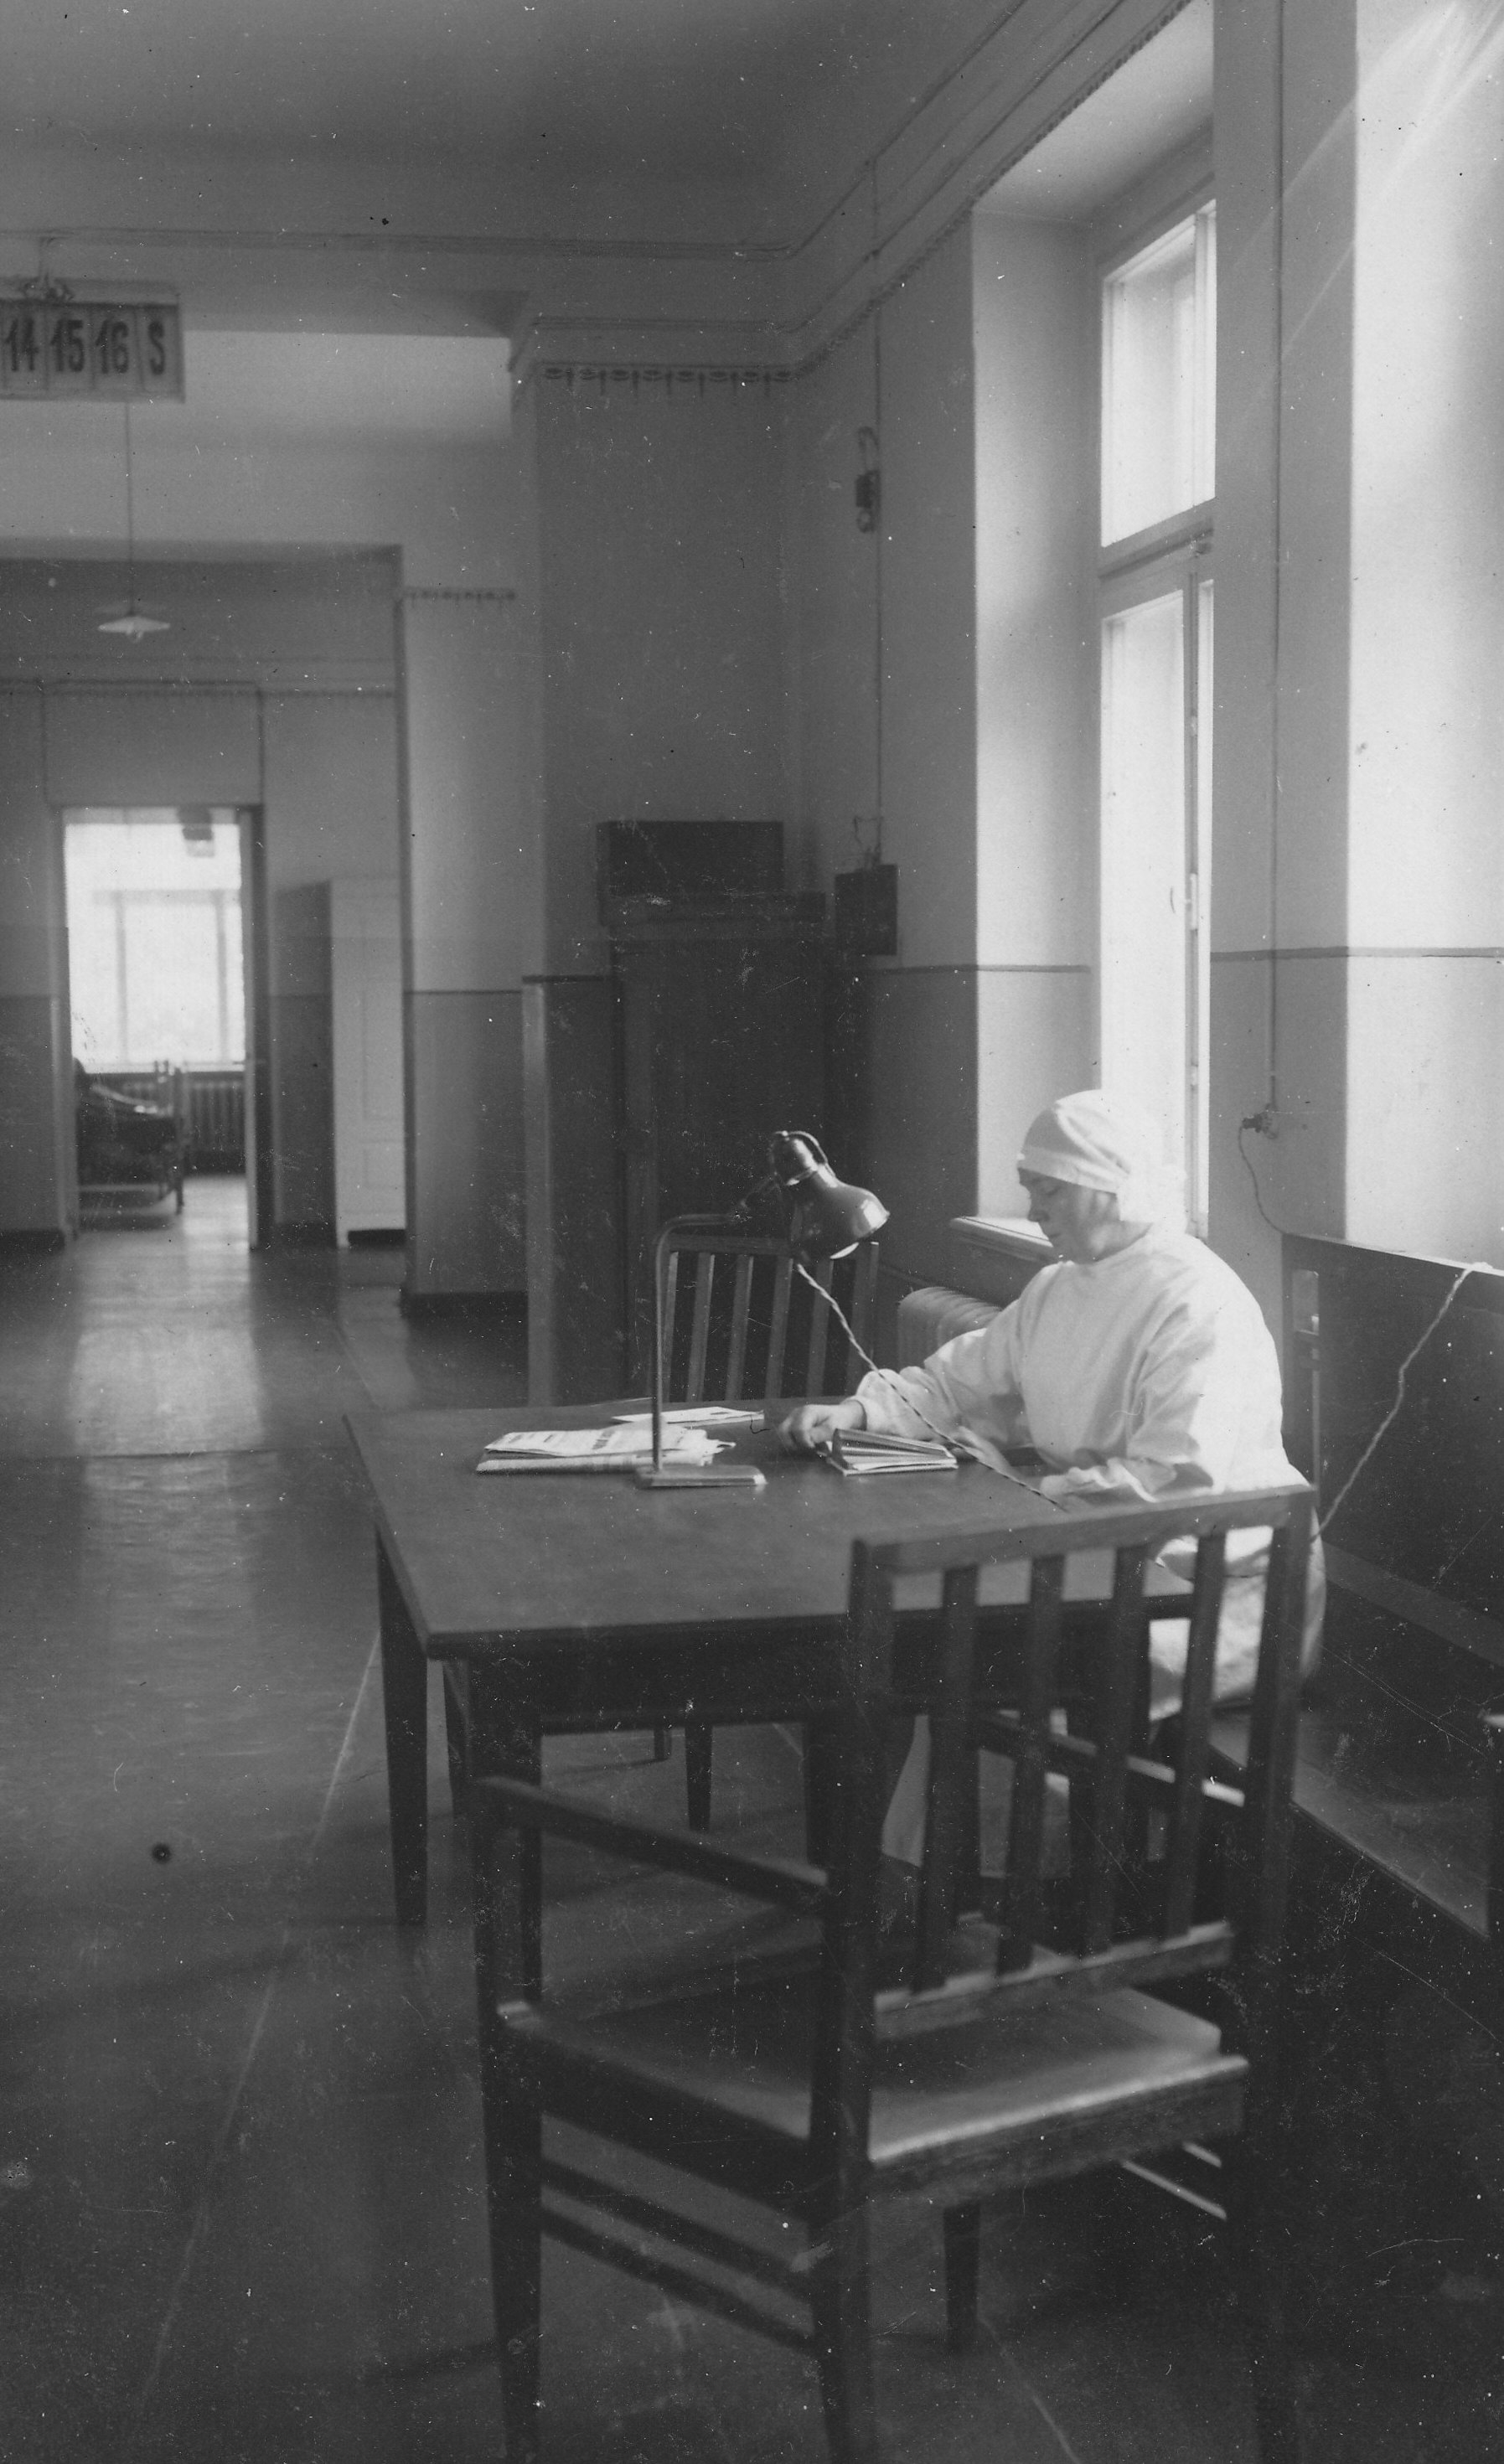 Tartu Clinic. End of the 1920s or beginning of the 1930s